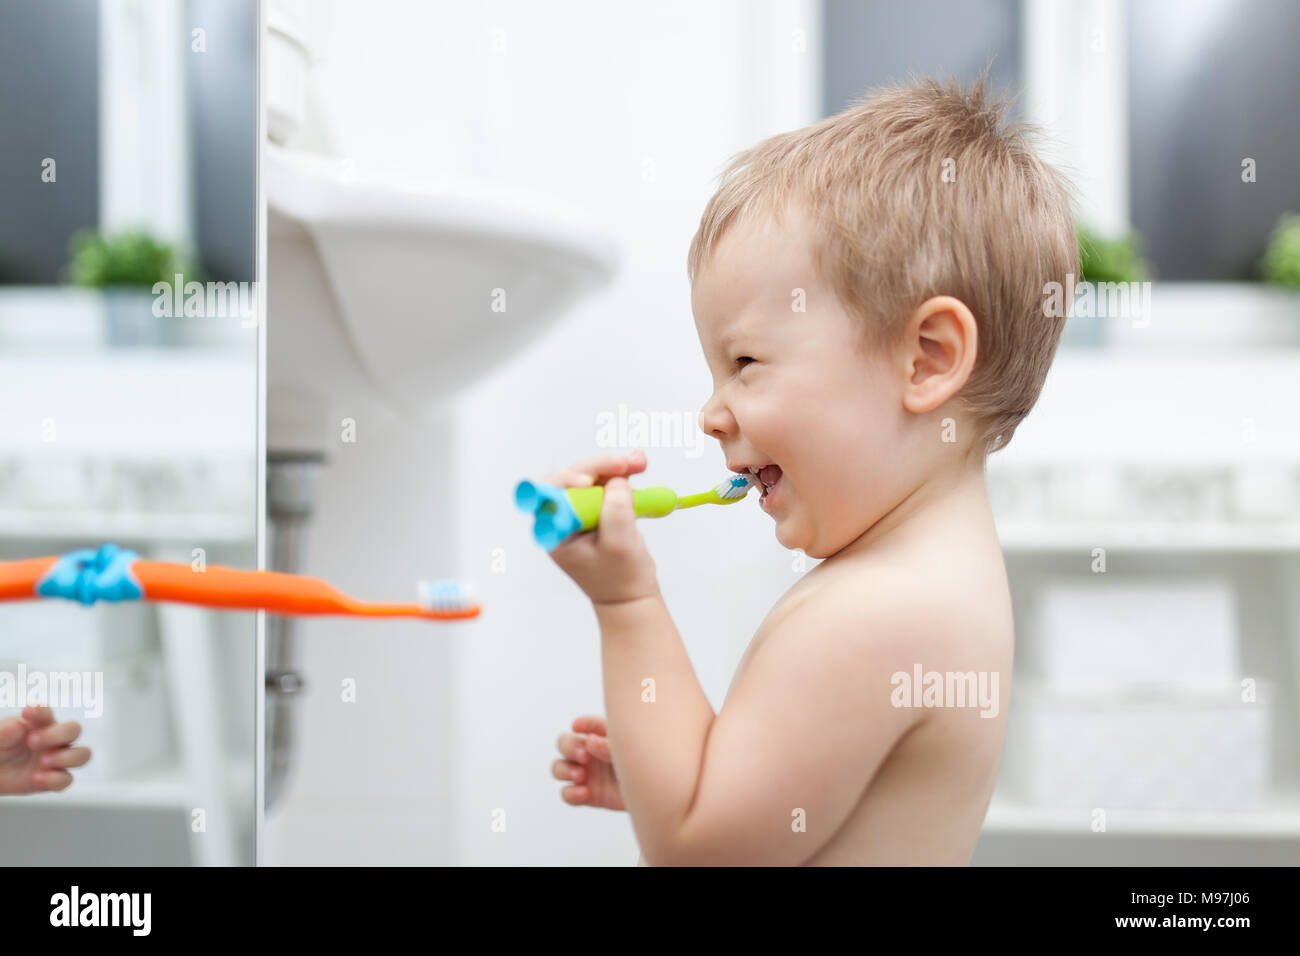 Adorable child learing how to brush his teeth in the bathroom Stock Photo